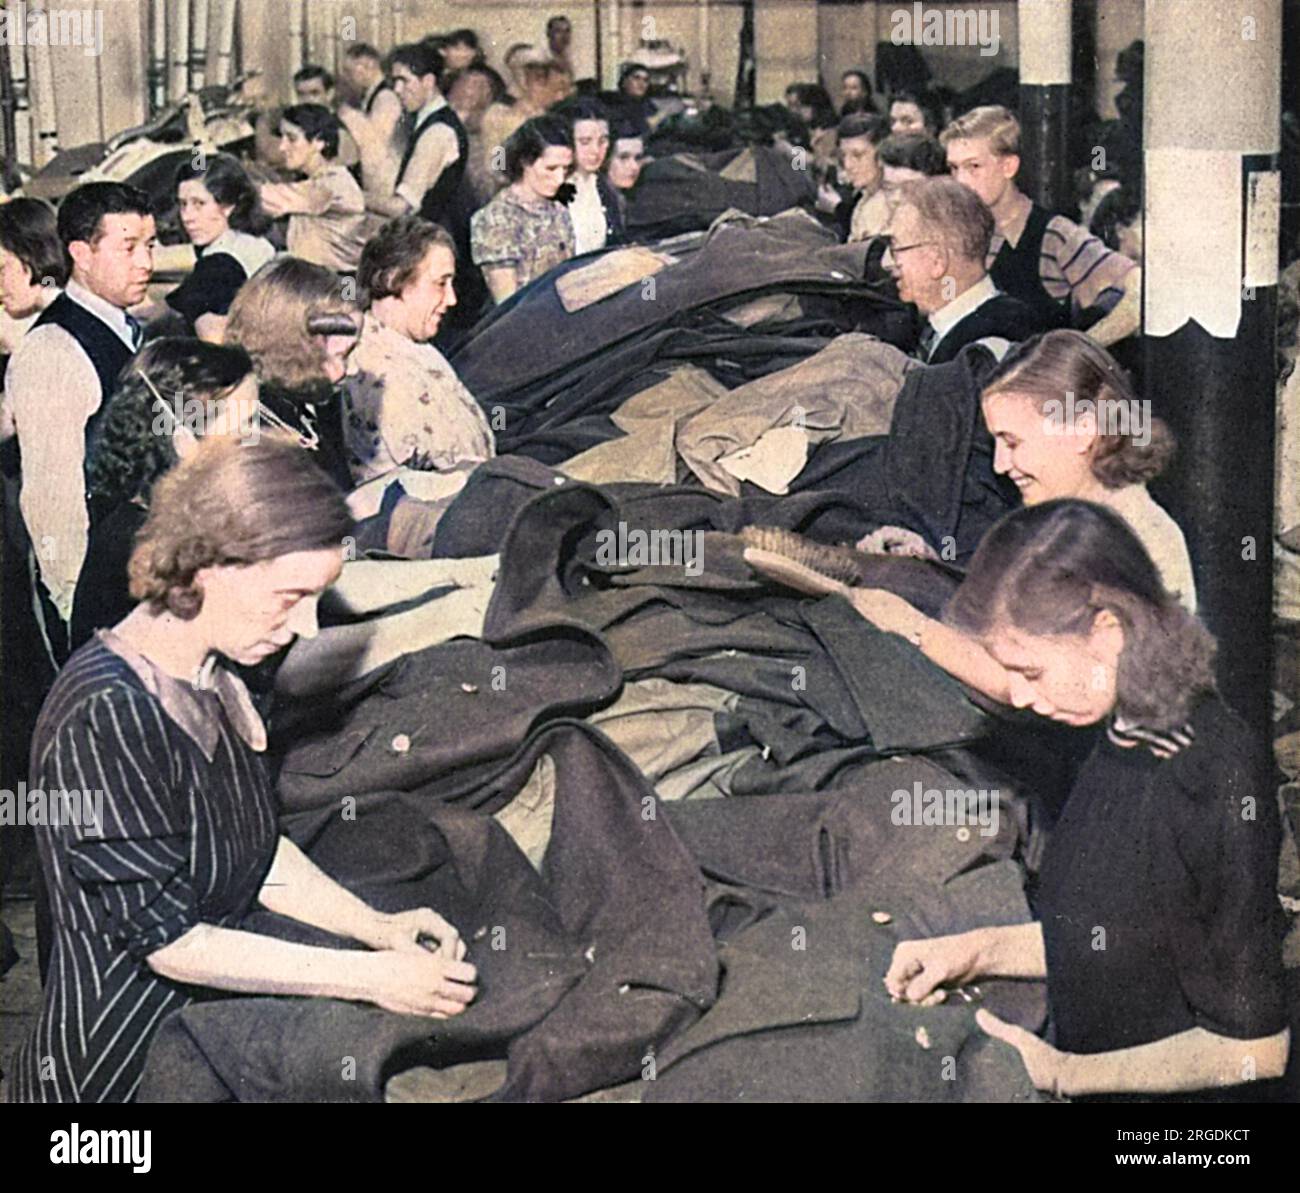 A great effort being made to get a big supply of greatcoats finished quickly so that no men may be caught by winter's grip without them.  Workers in an army clothing factory busy sewing buttons on coats for British servicemen during World War Two. Stock Photo